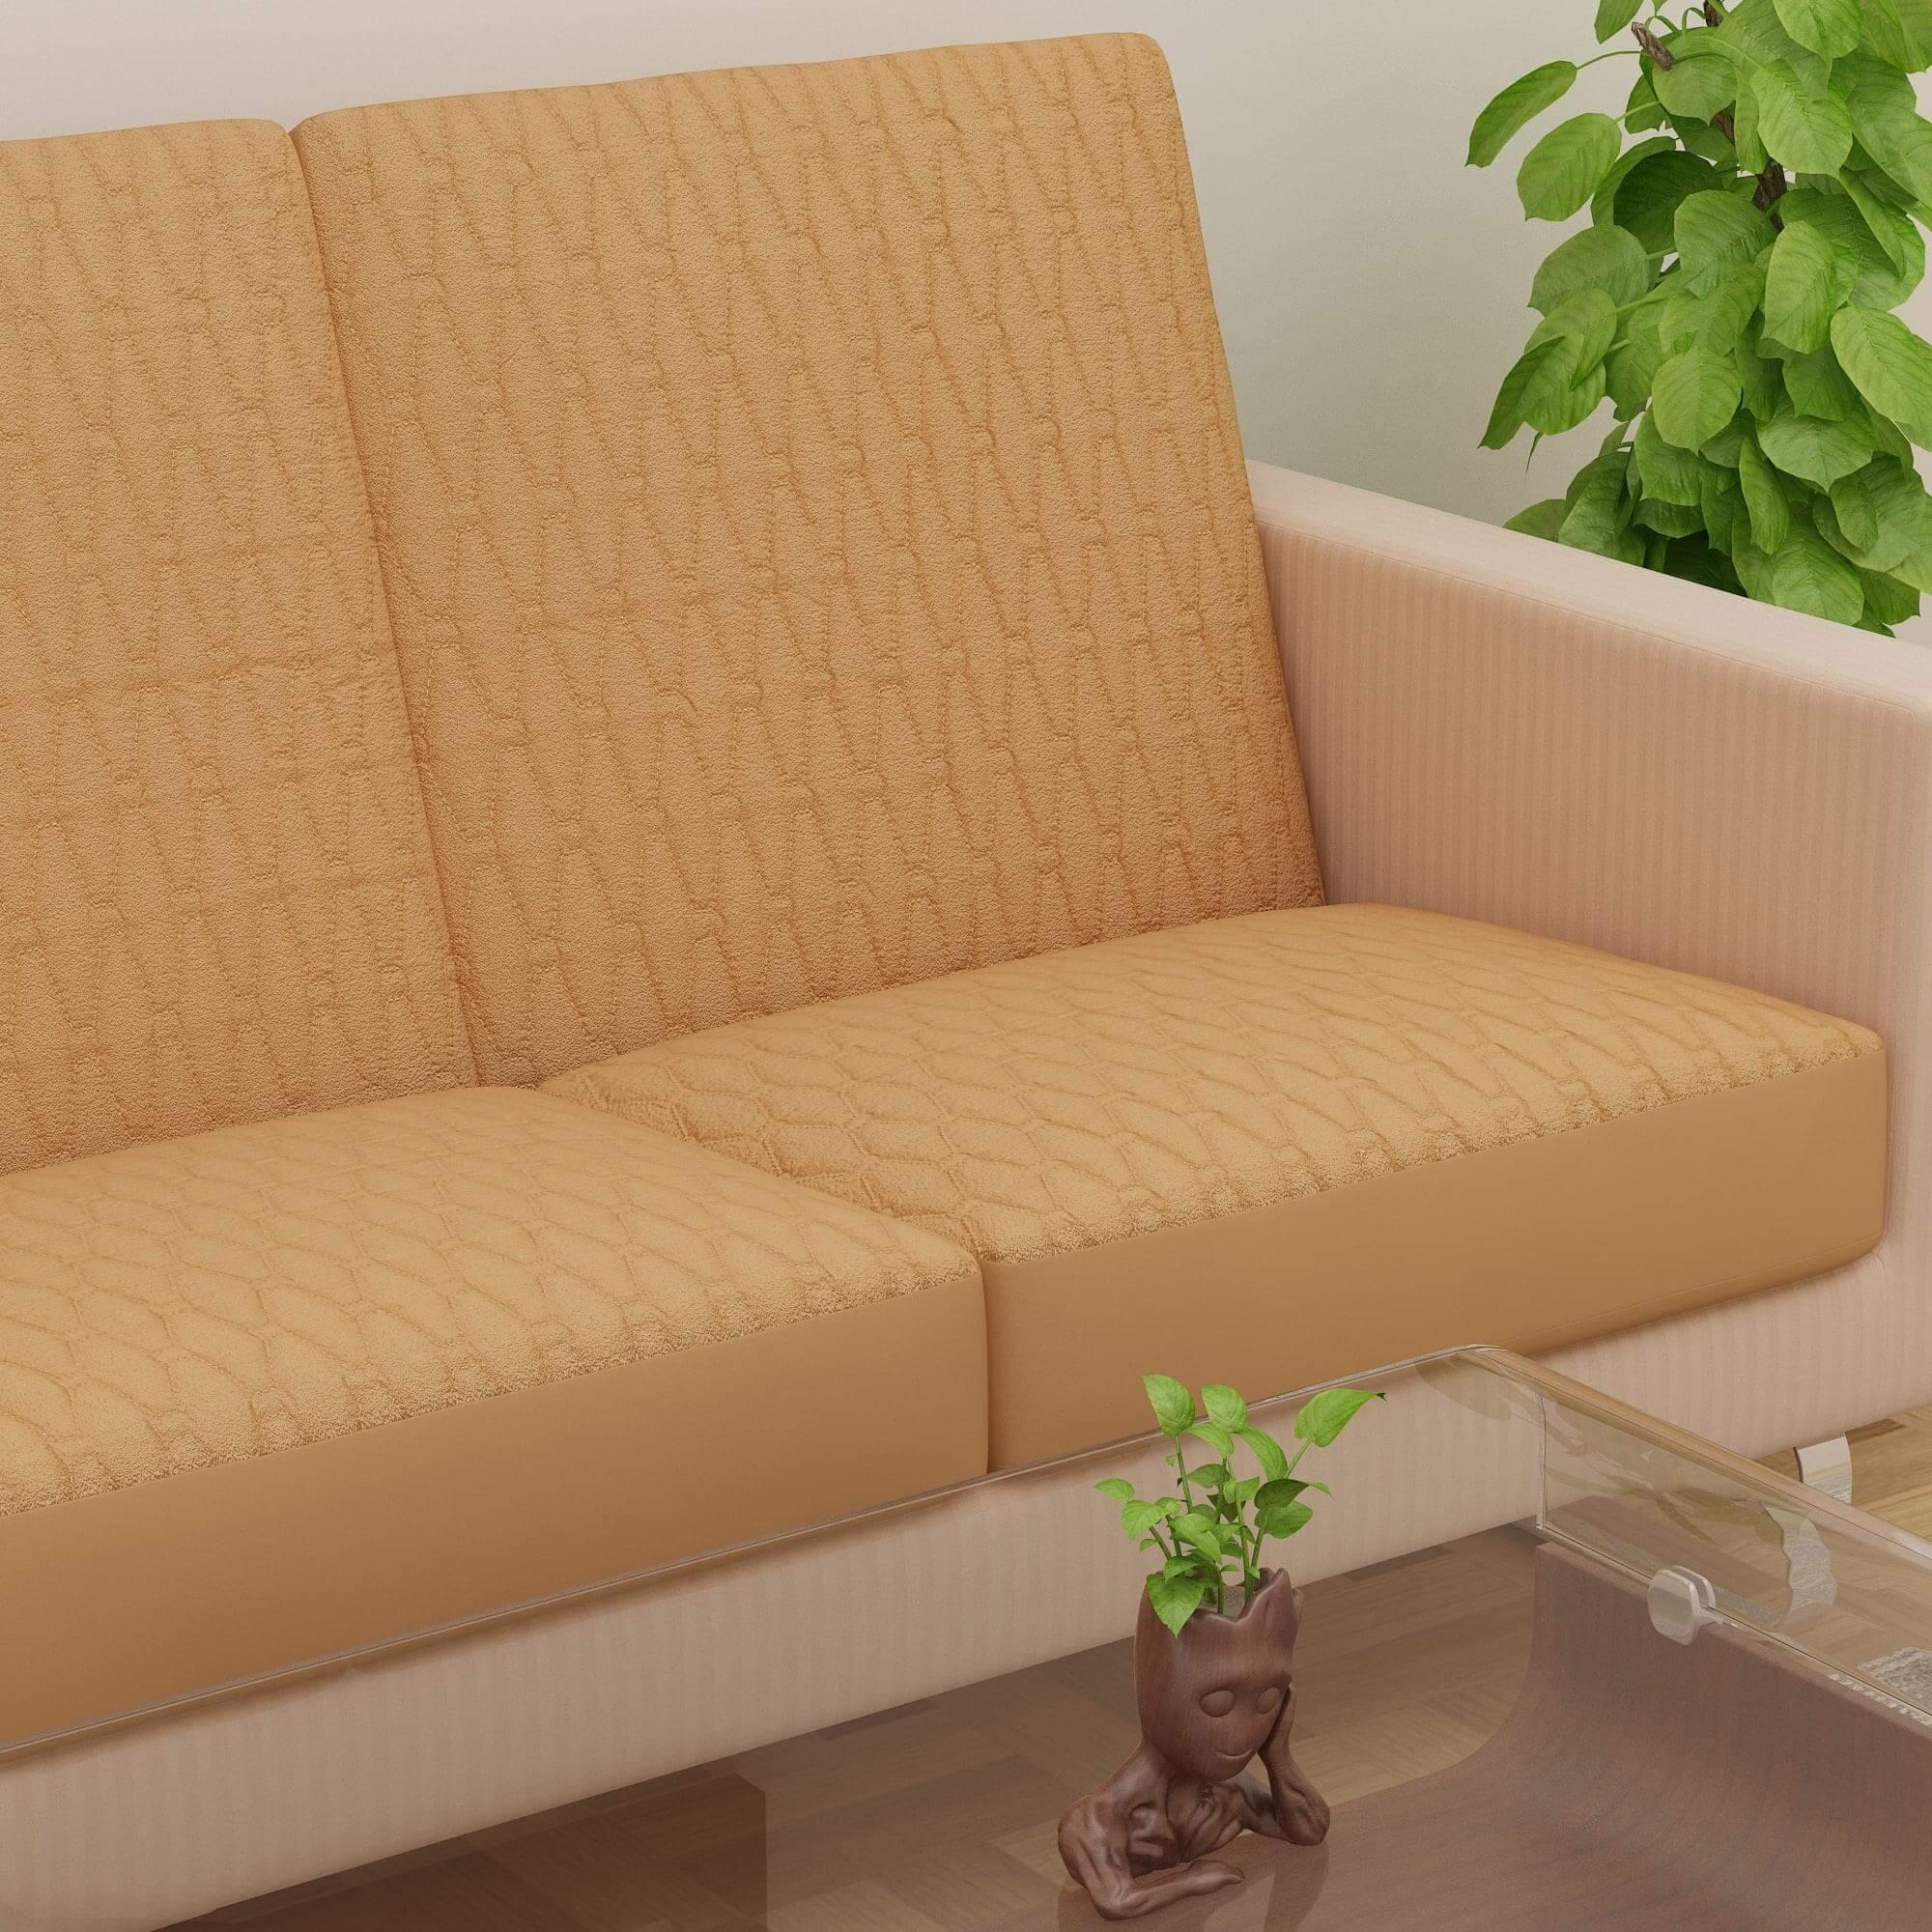 Amber Quilted Waterproof Sofa Seat Protector Cover with Stretchable Elastic, Beige